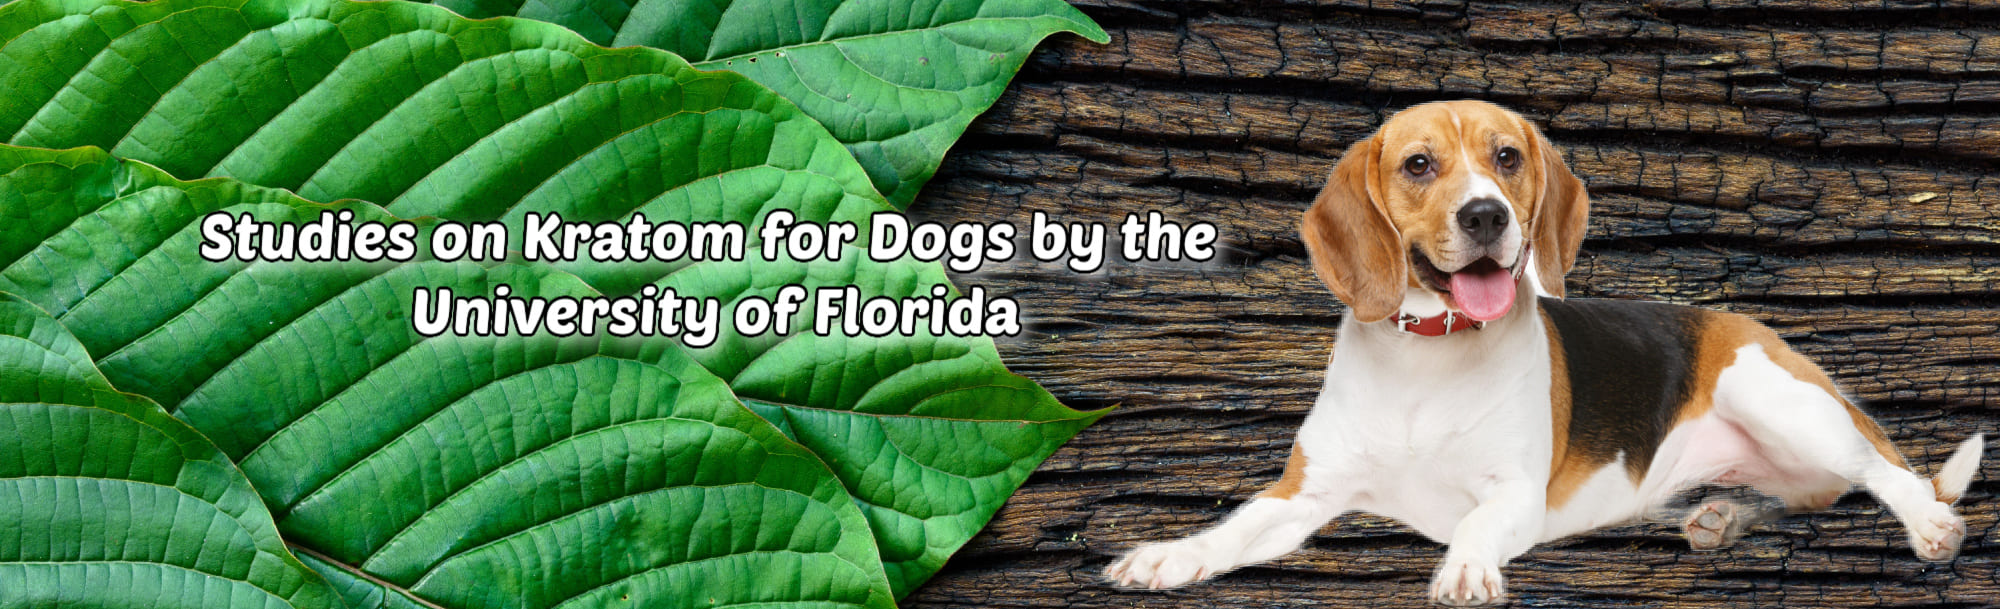 image of studies on kratom for dogs by the university of florida